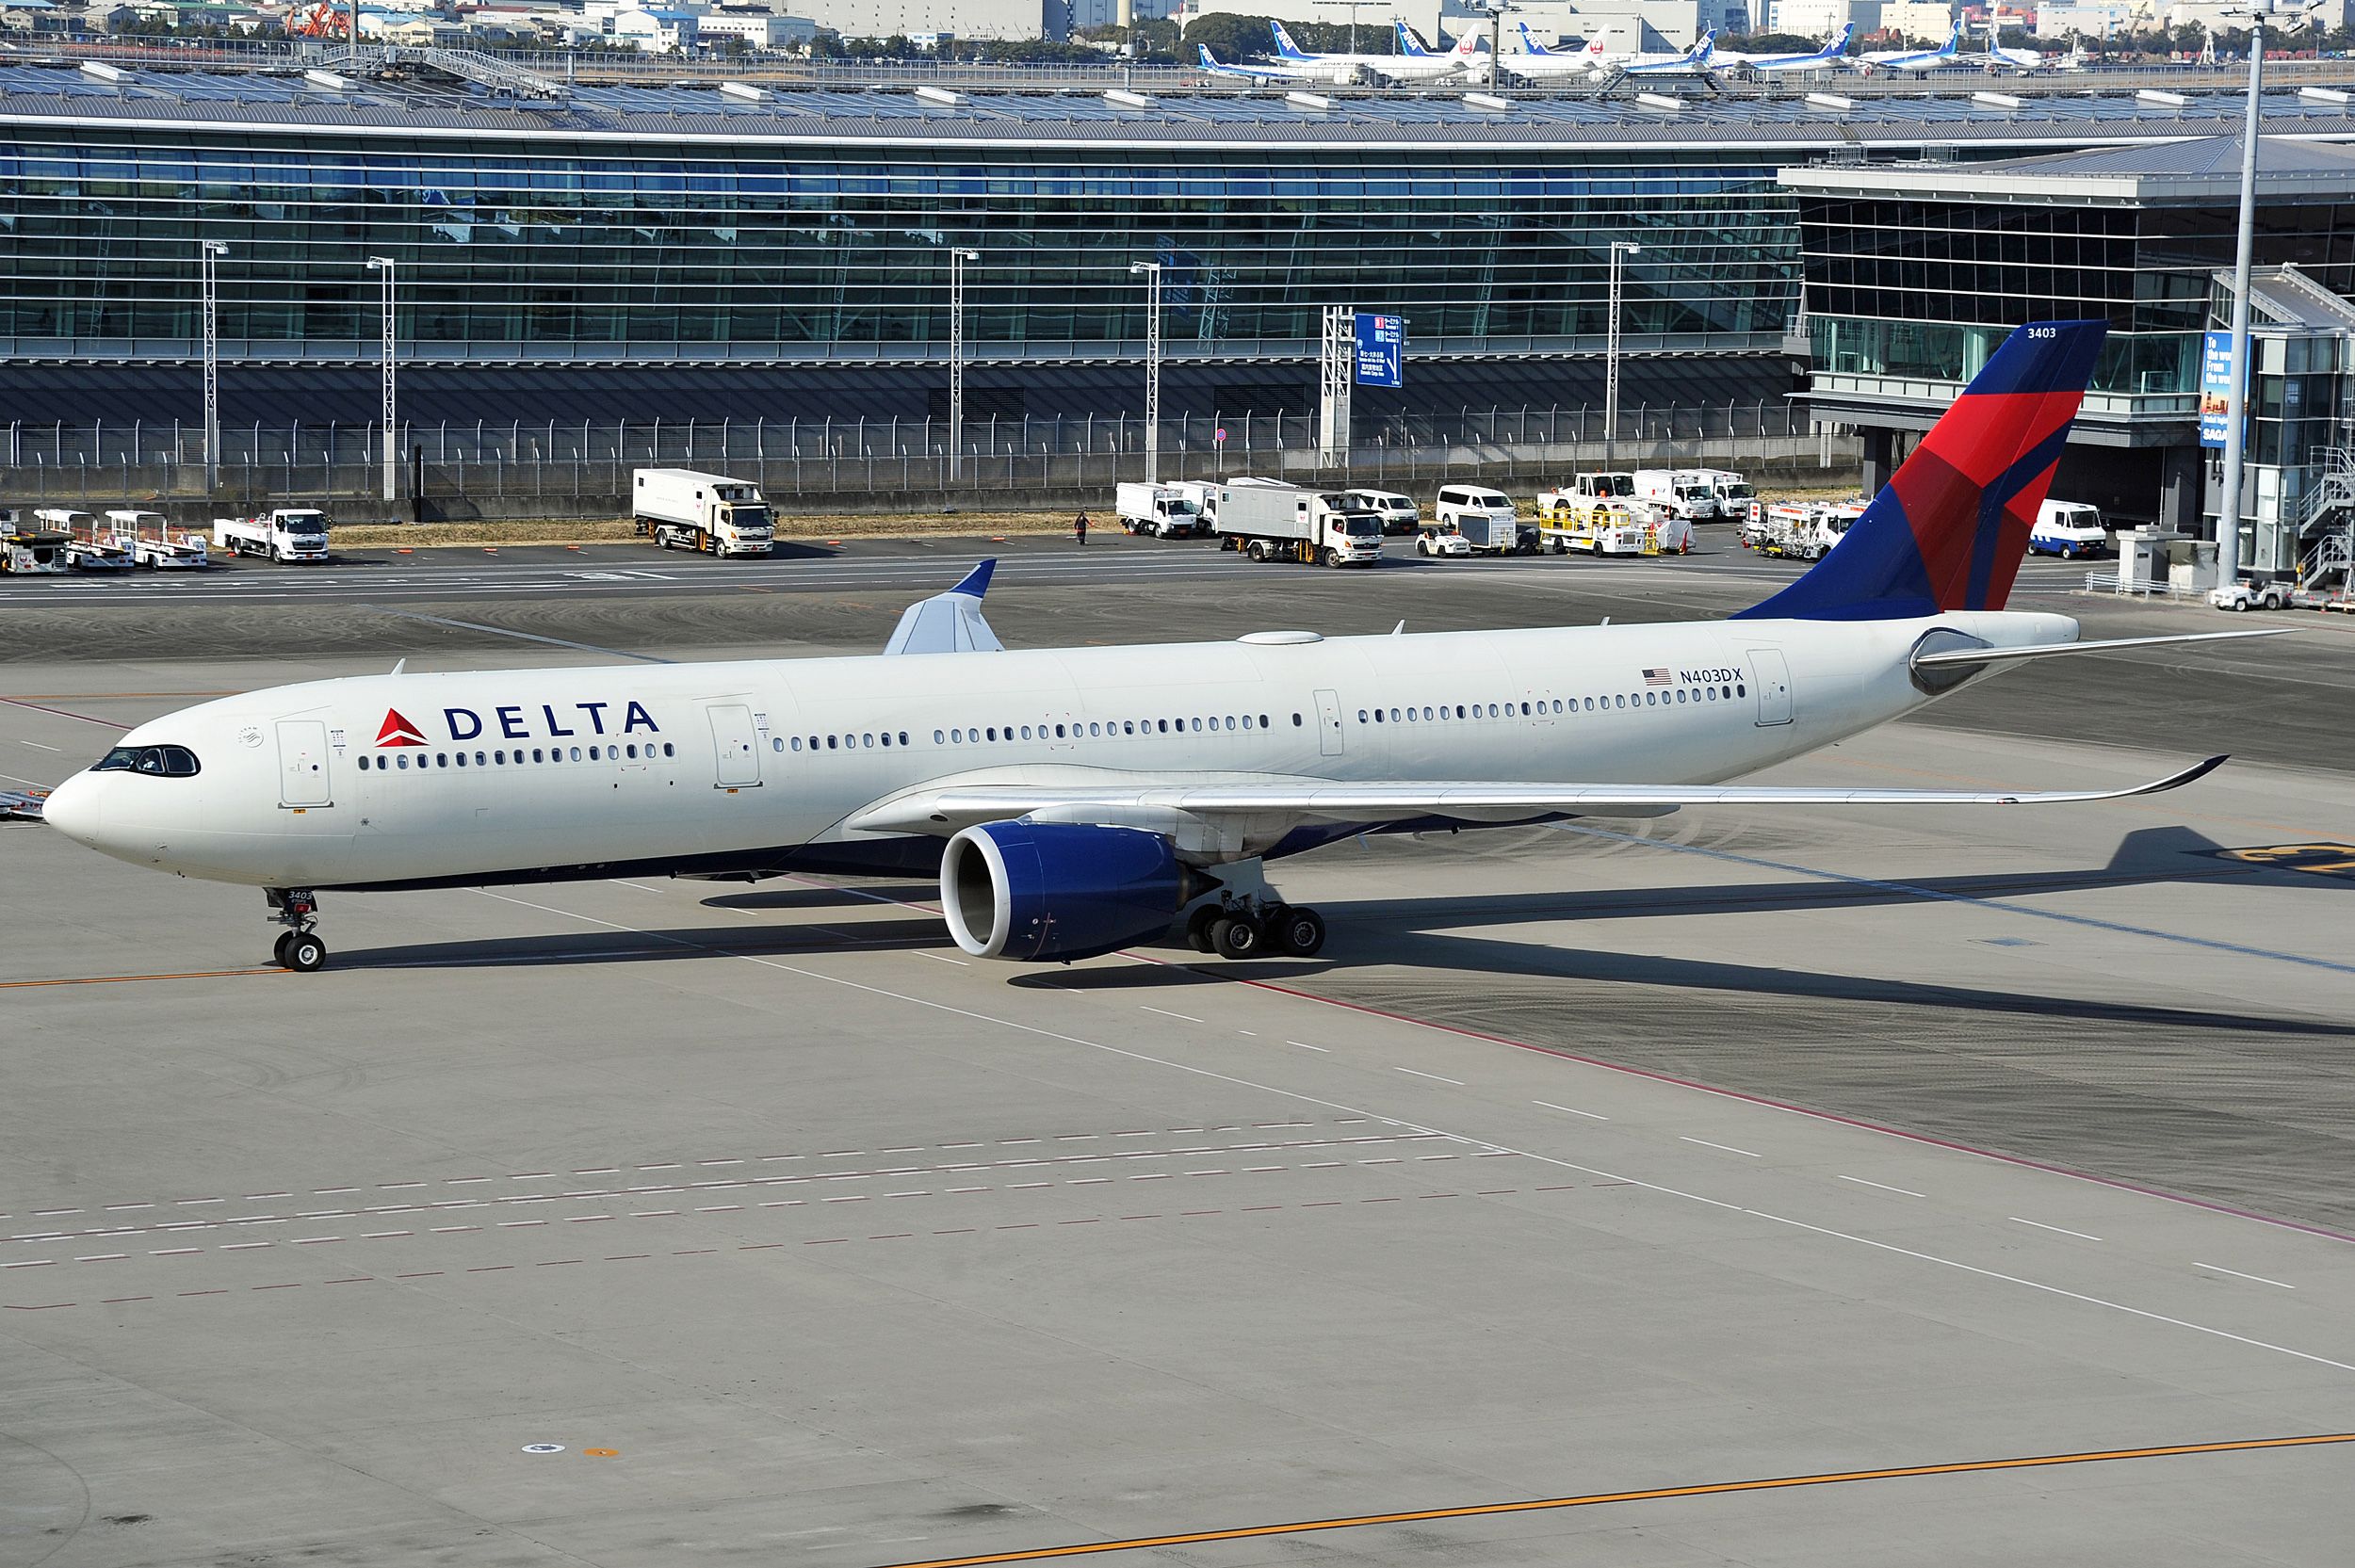 A Delta Air Lines Airbus A330-900 on an airport apron.